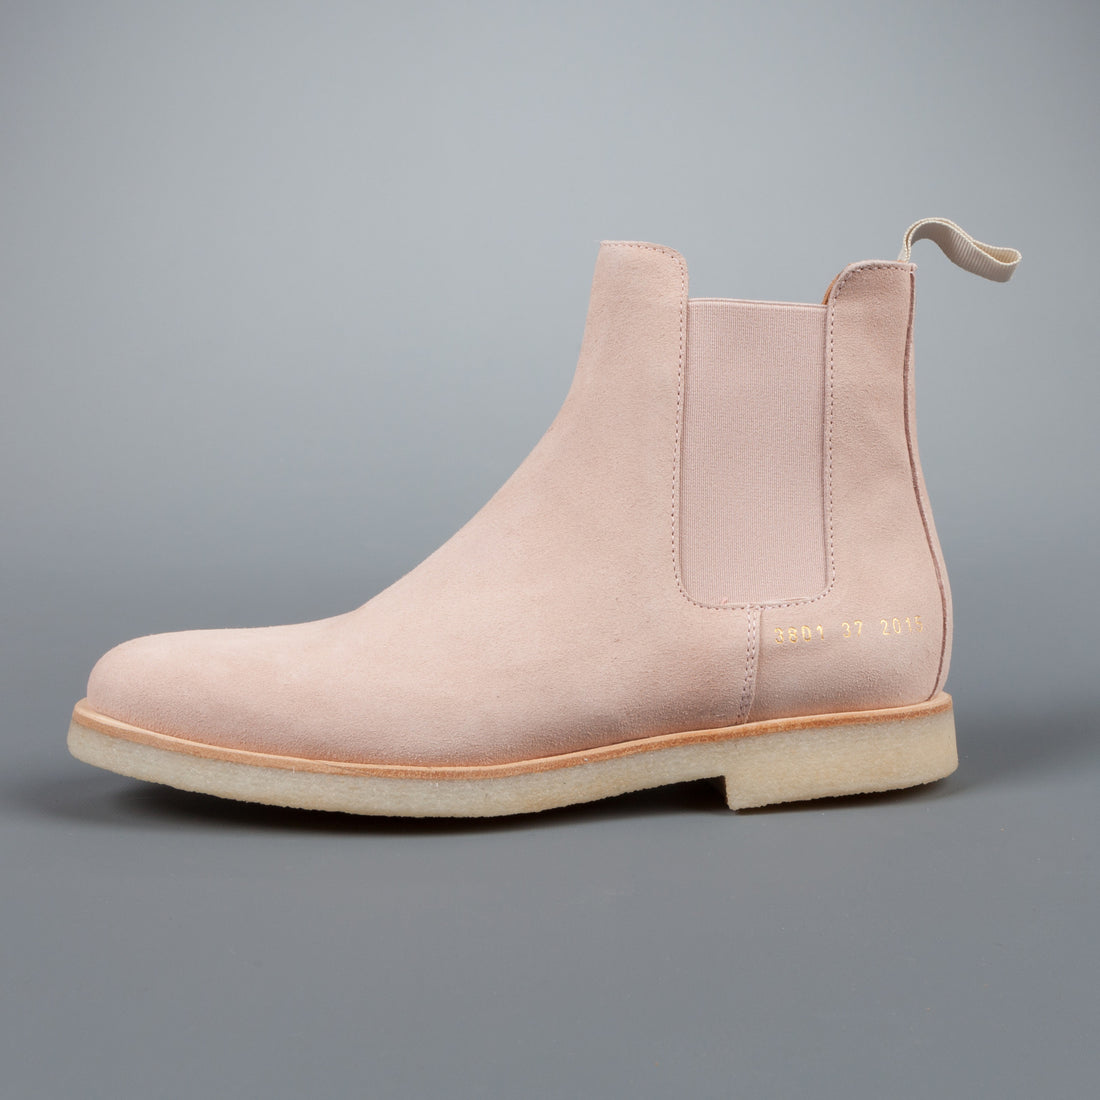 Common Projects Woman by Common Projects Chelsea boot in Blush Suede – Boone Store